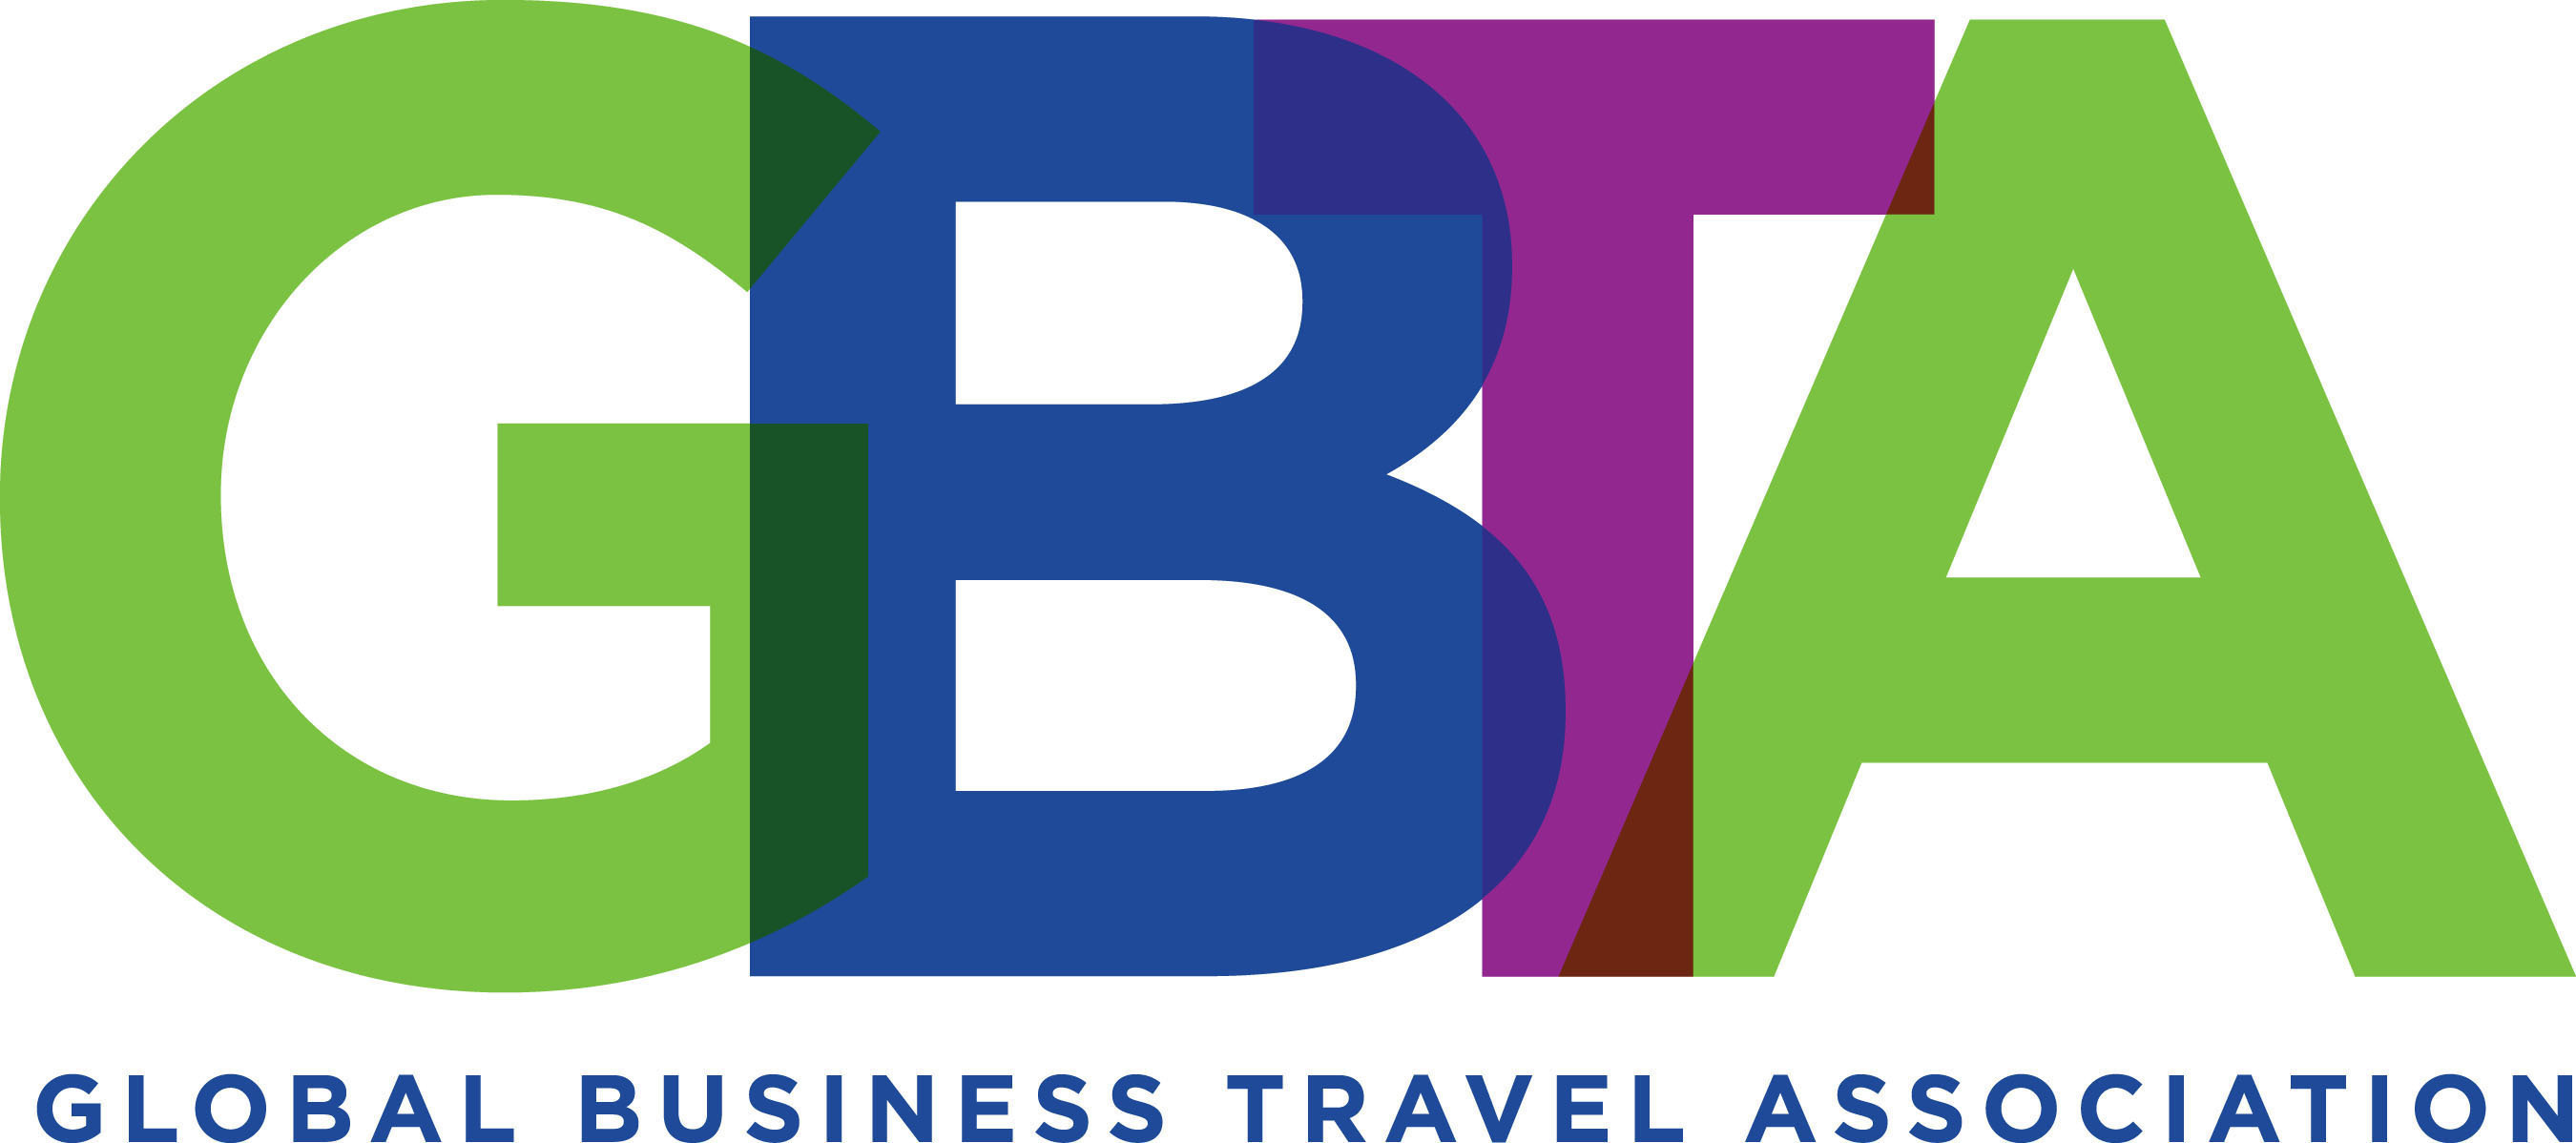 The Global Business Travel Association.